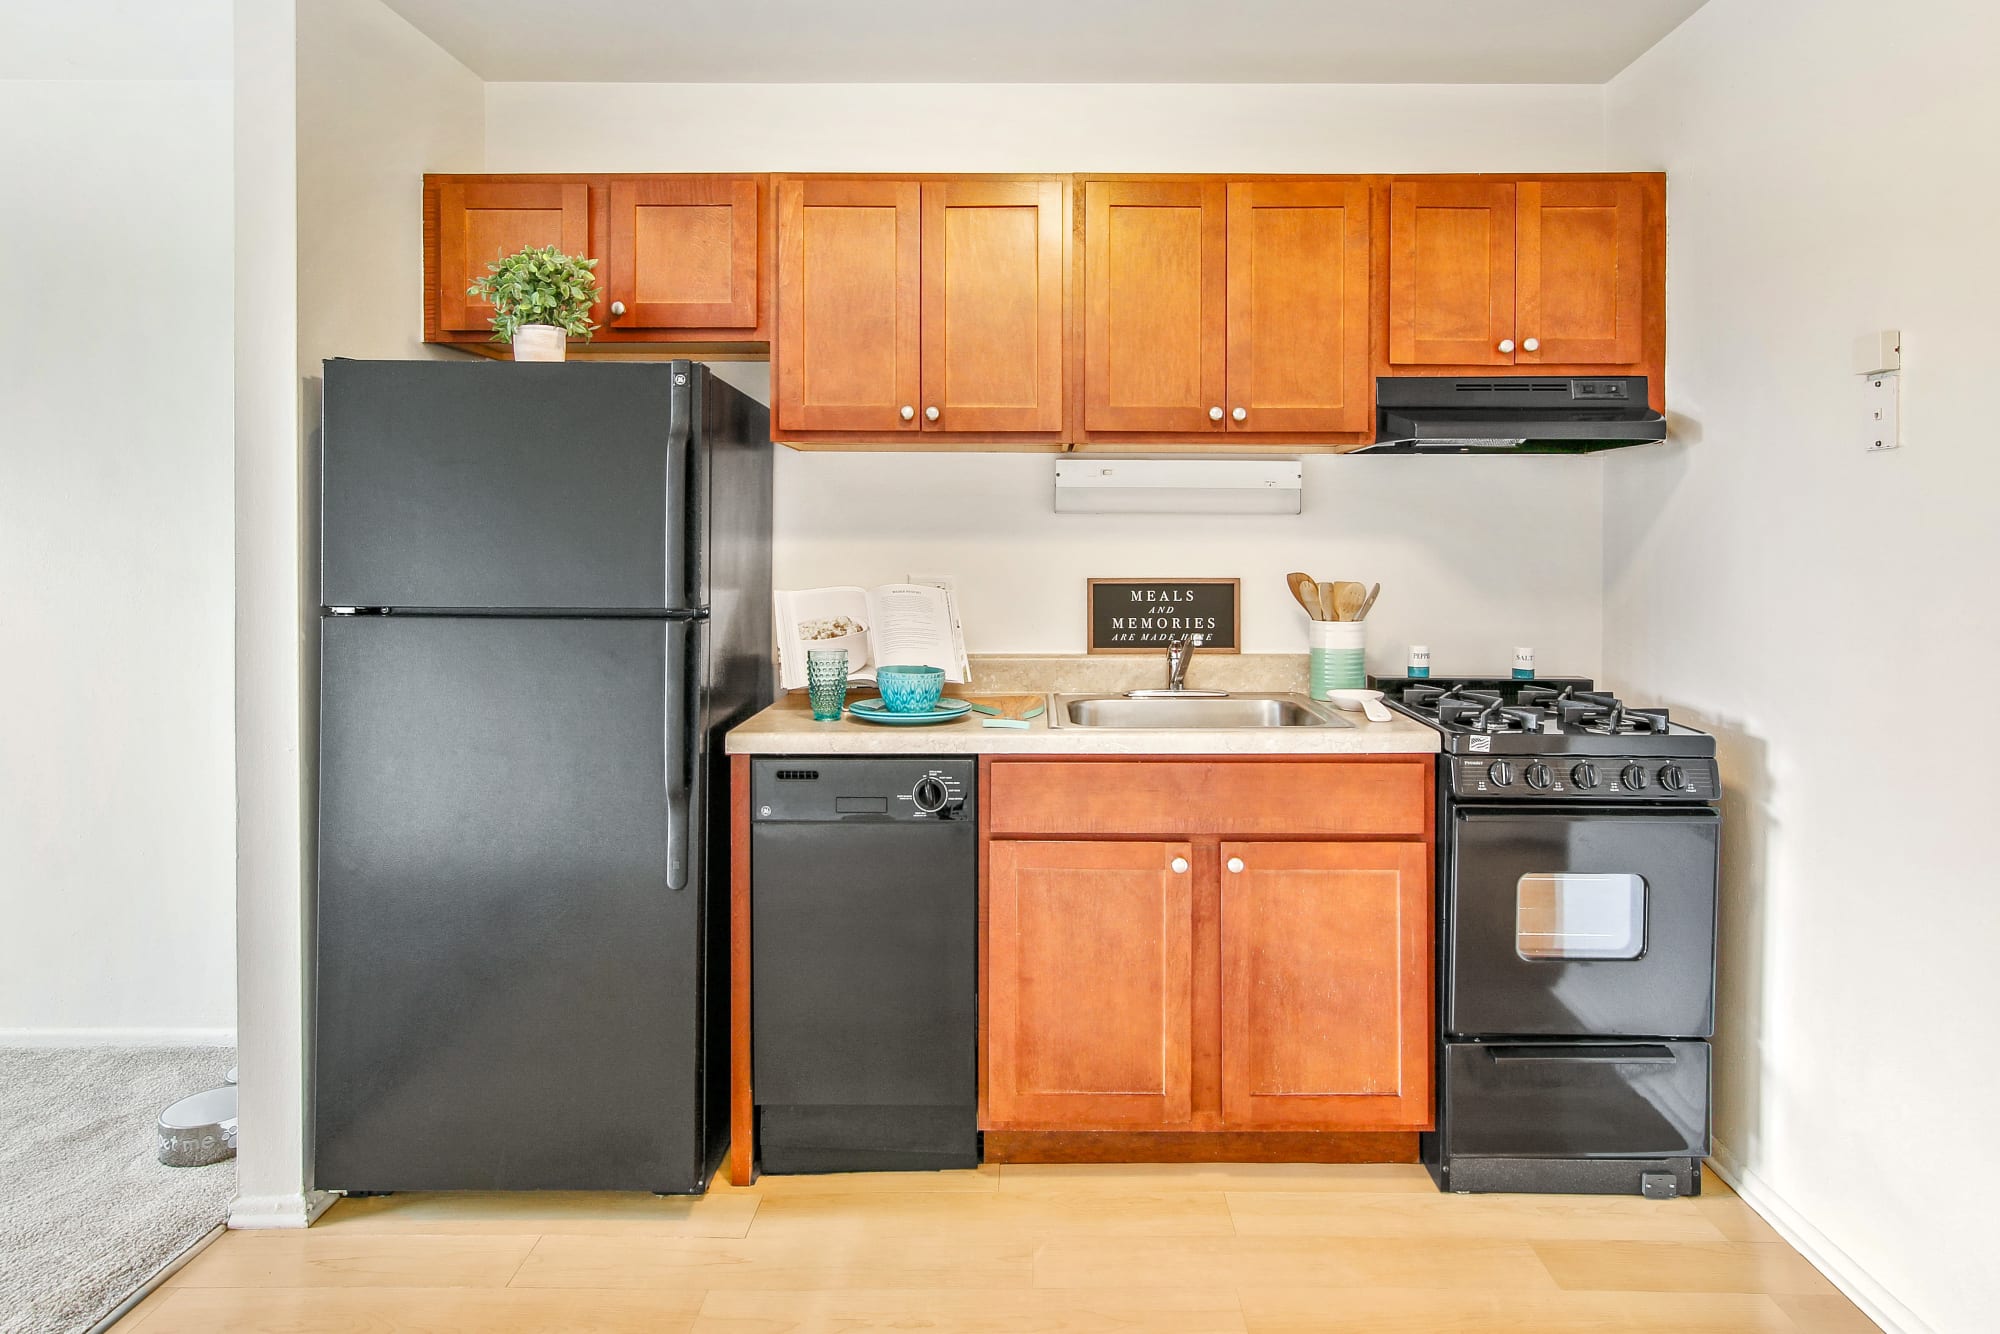 An apartment kitchen with oak cabinets at Riverstone Apartments in Bolingbrook, Illinois